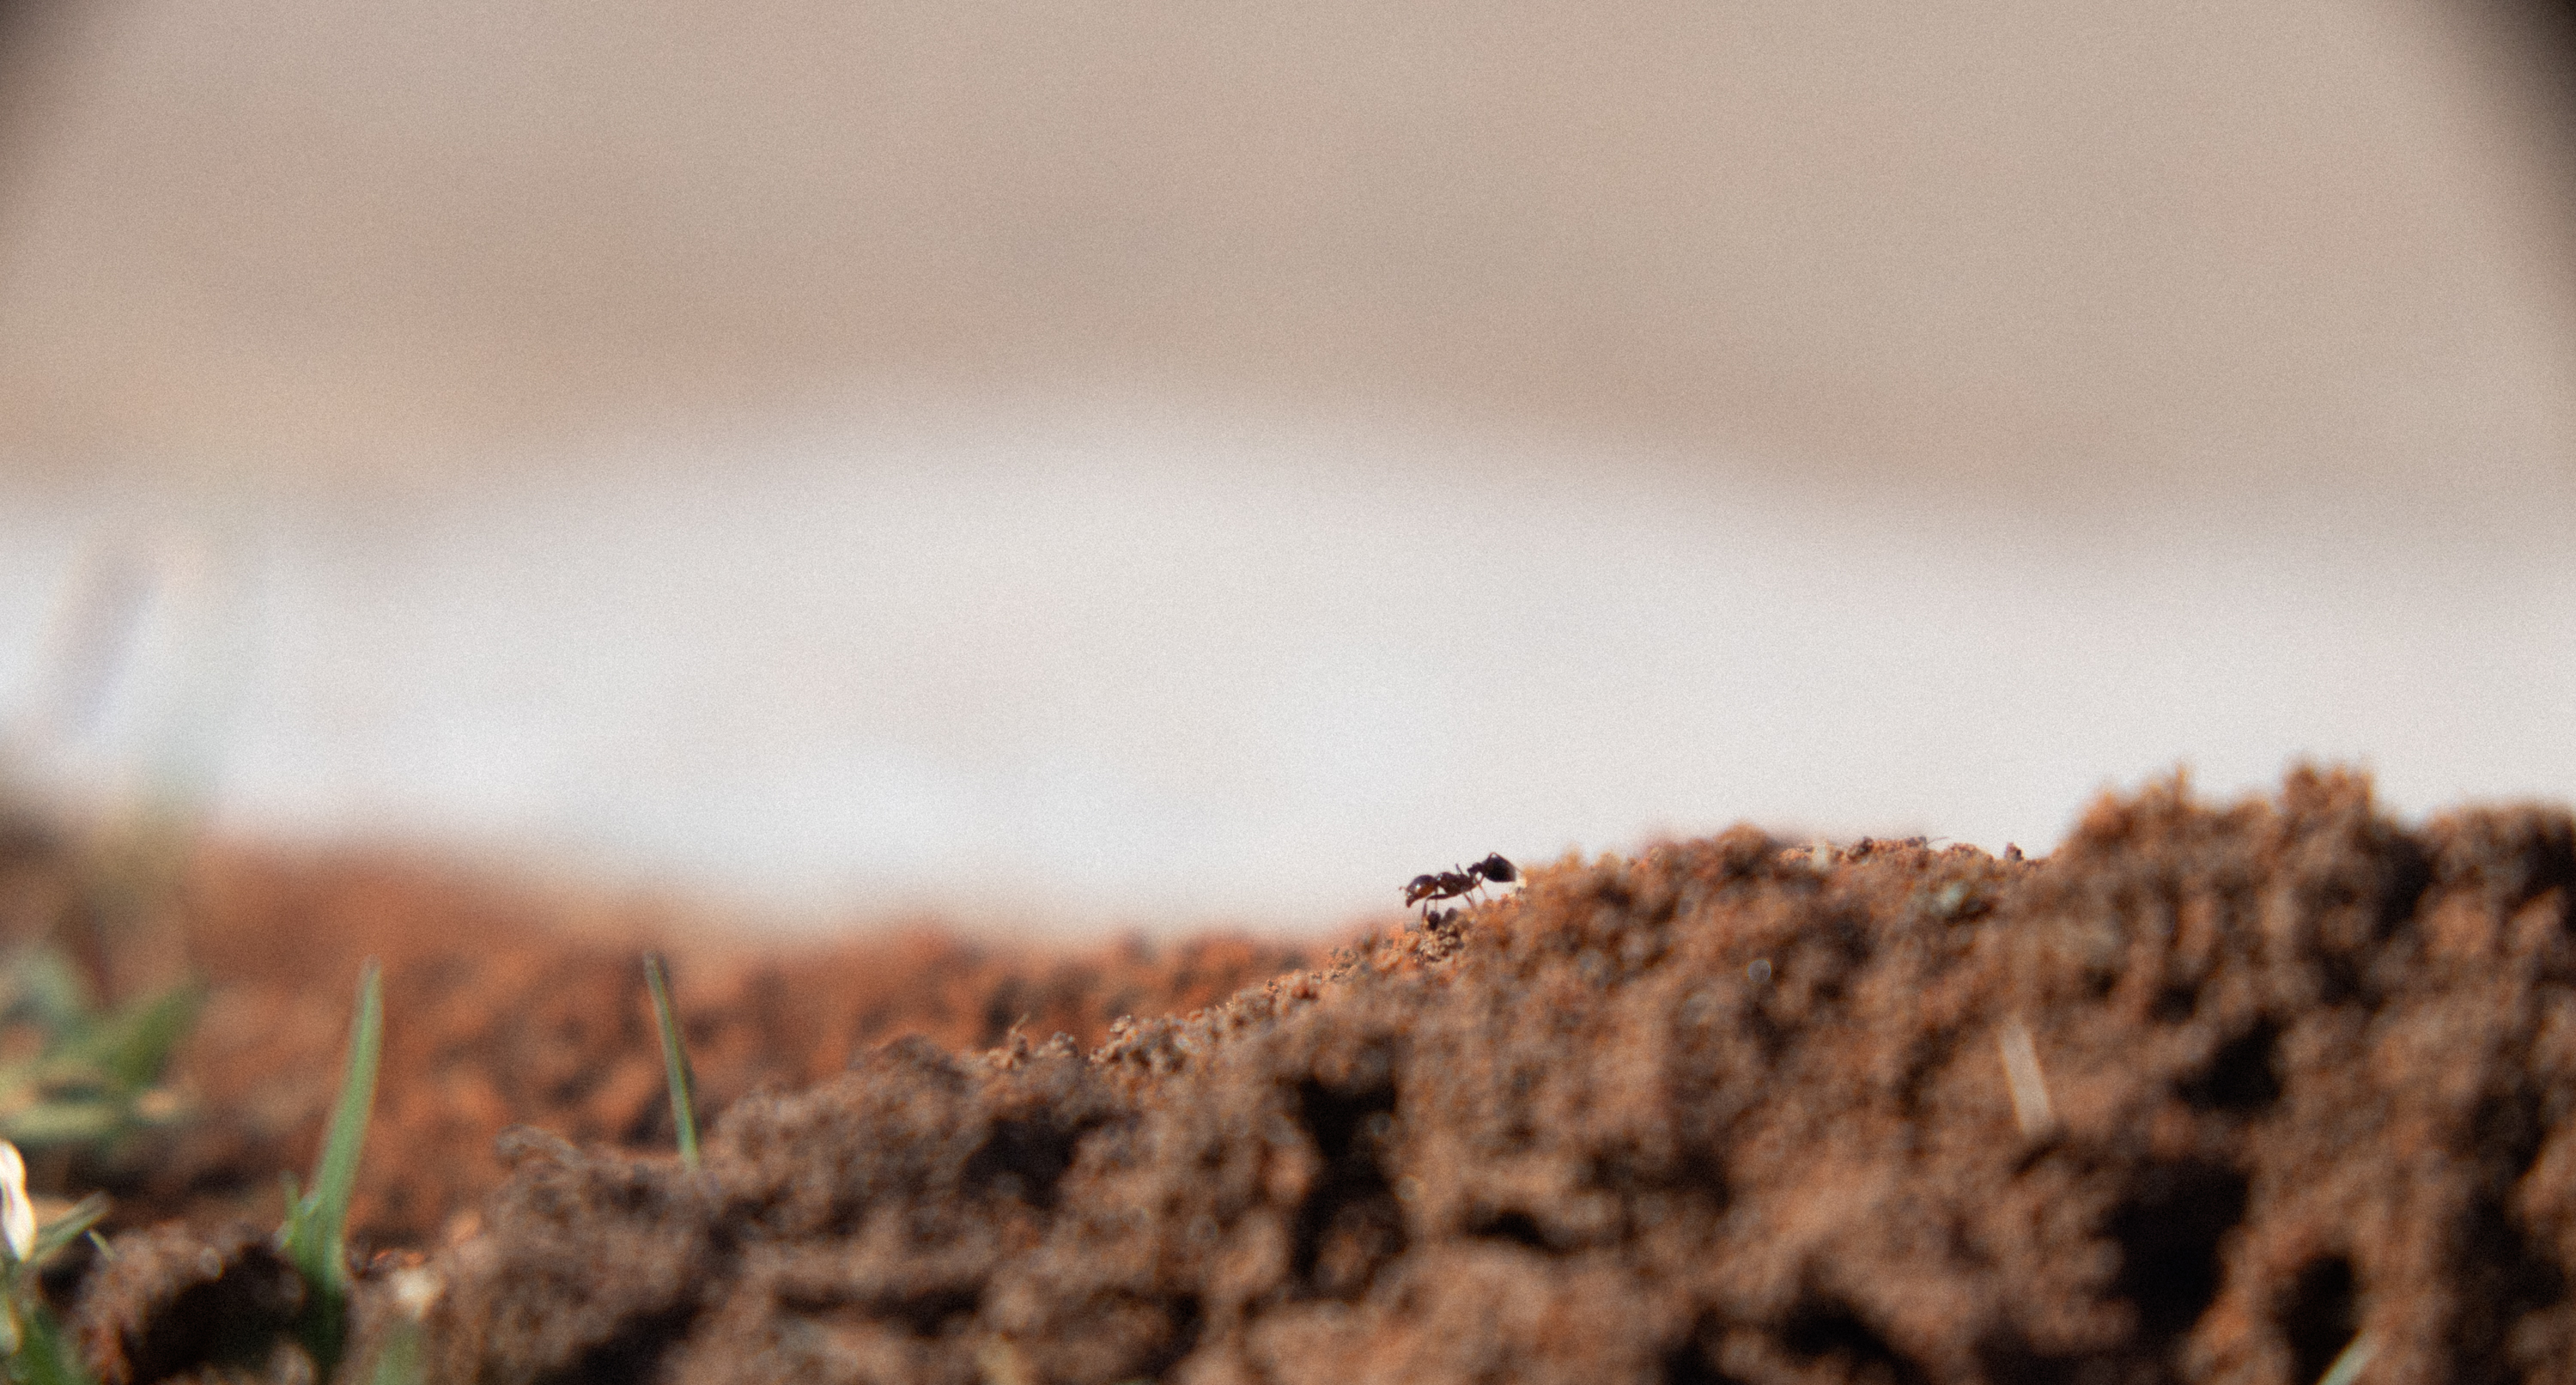 Up Close & Personal Photo of an Ant